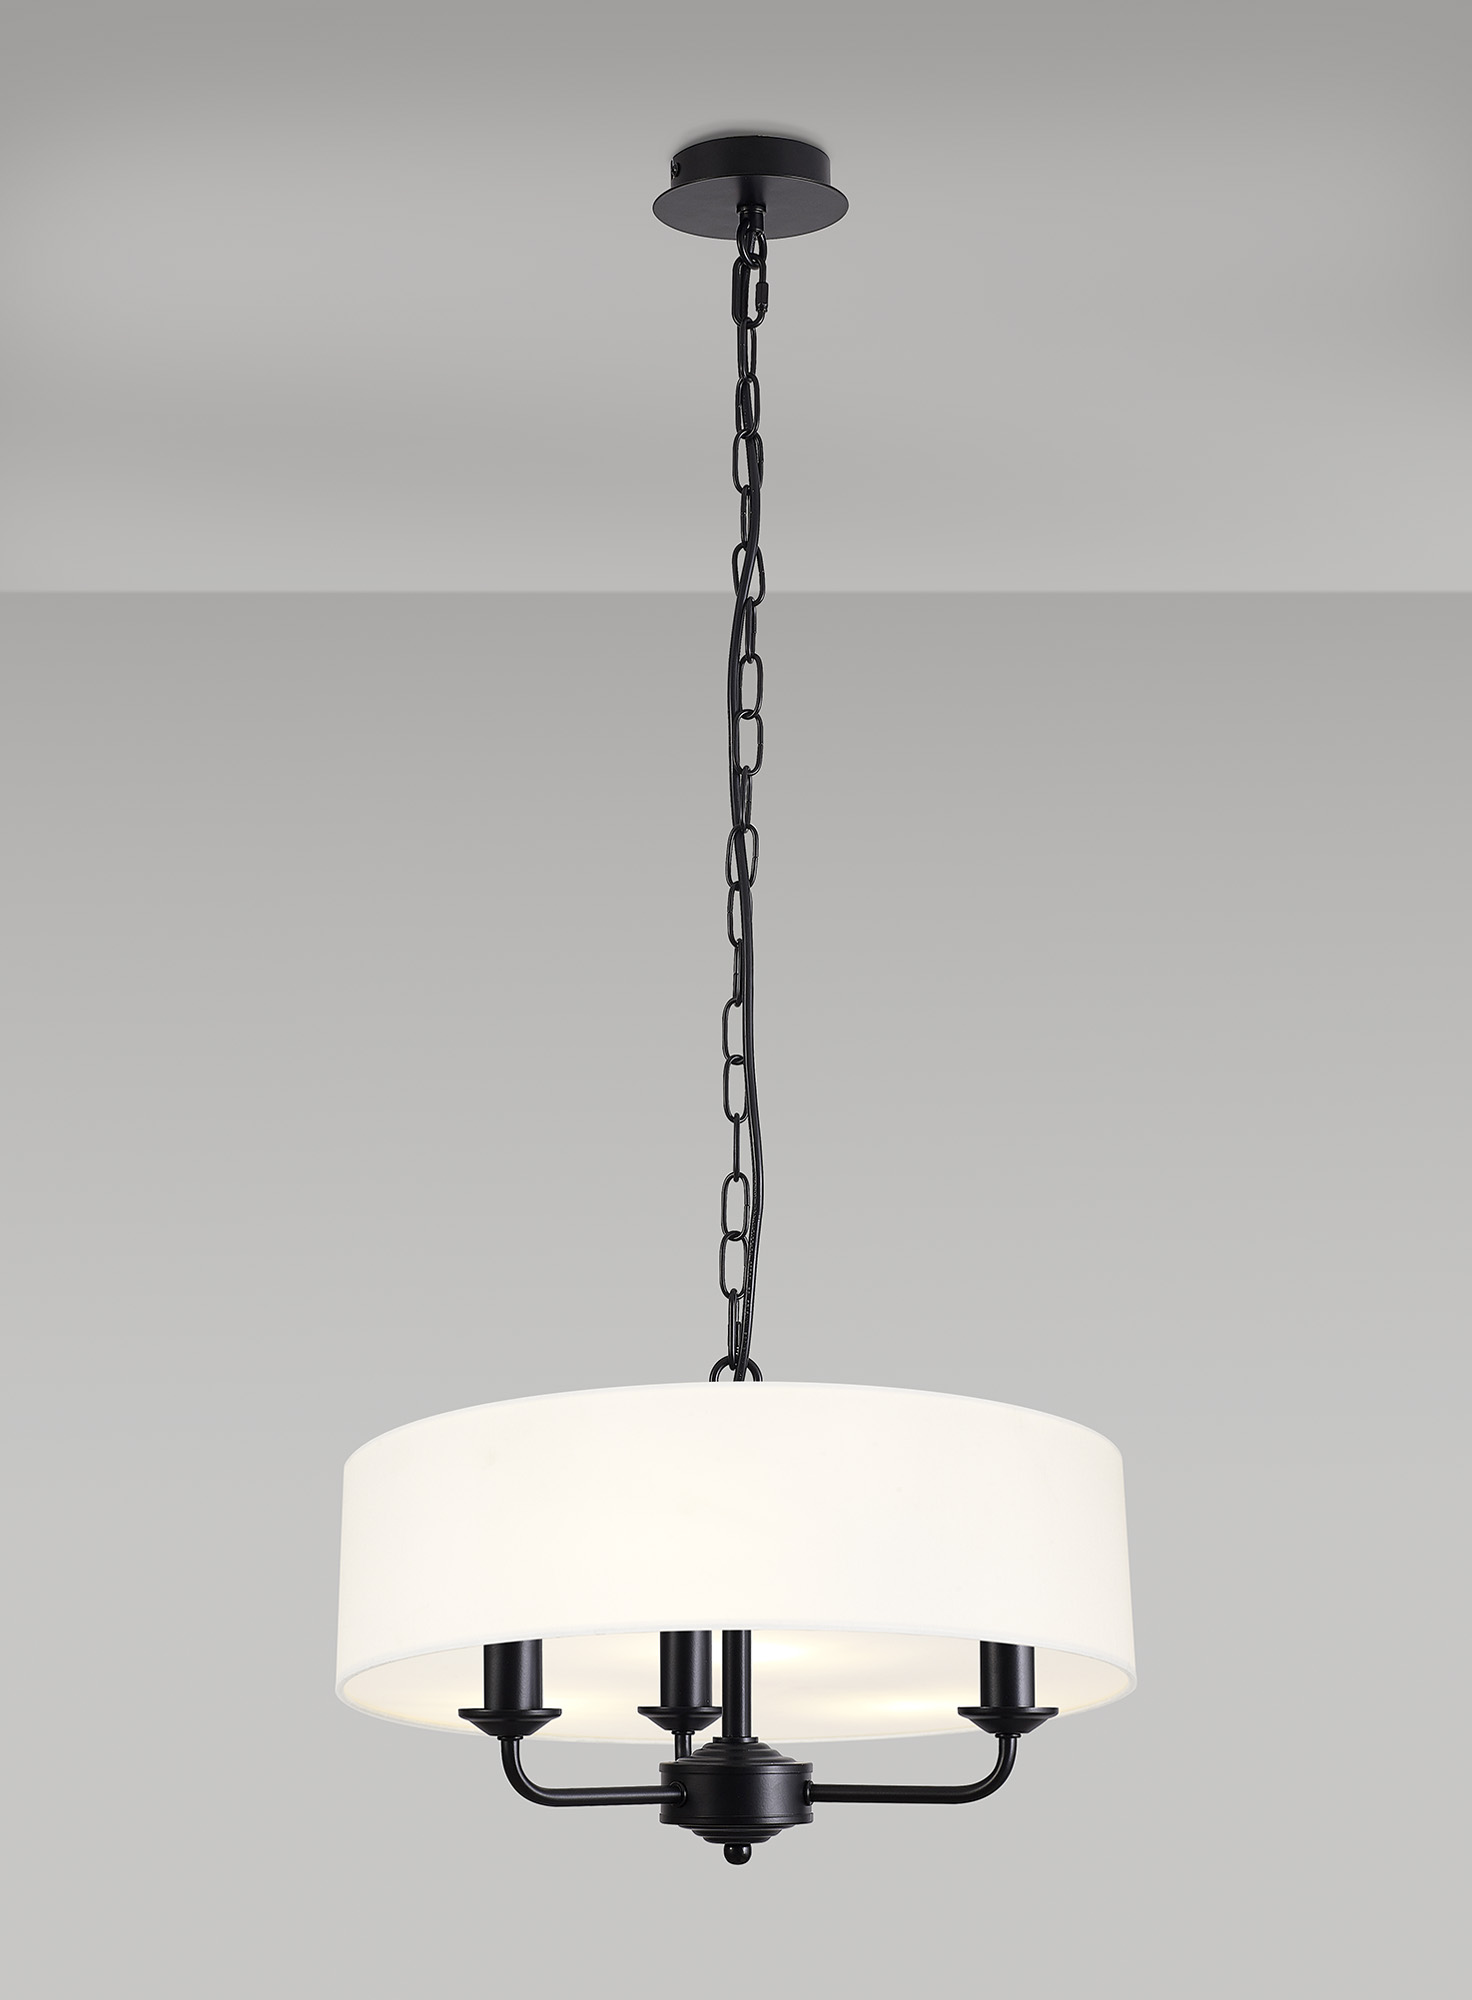 Banyan MB WH Ceiling Lights Deco Multi Arm Fittings